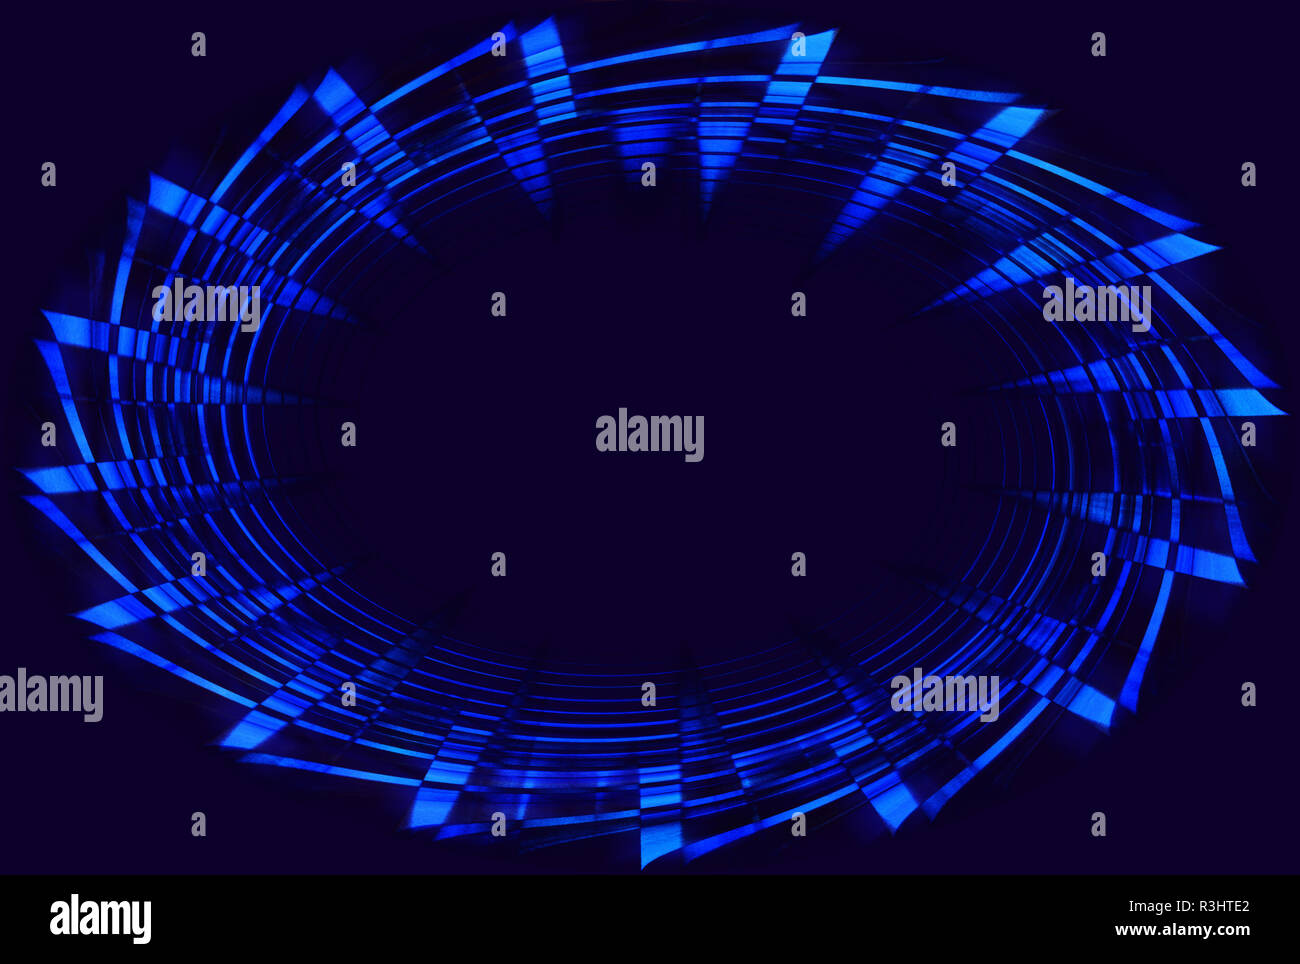 tunnel-vision-stock-photo-alamy